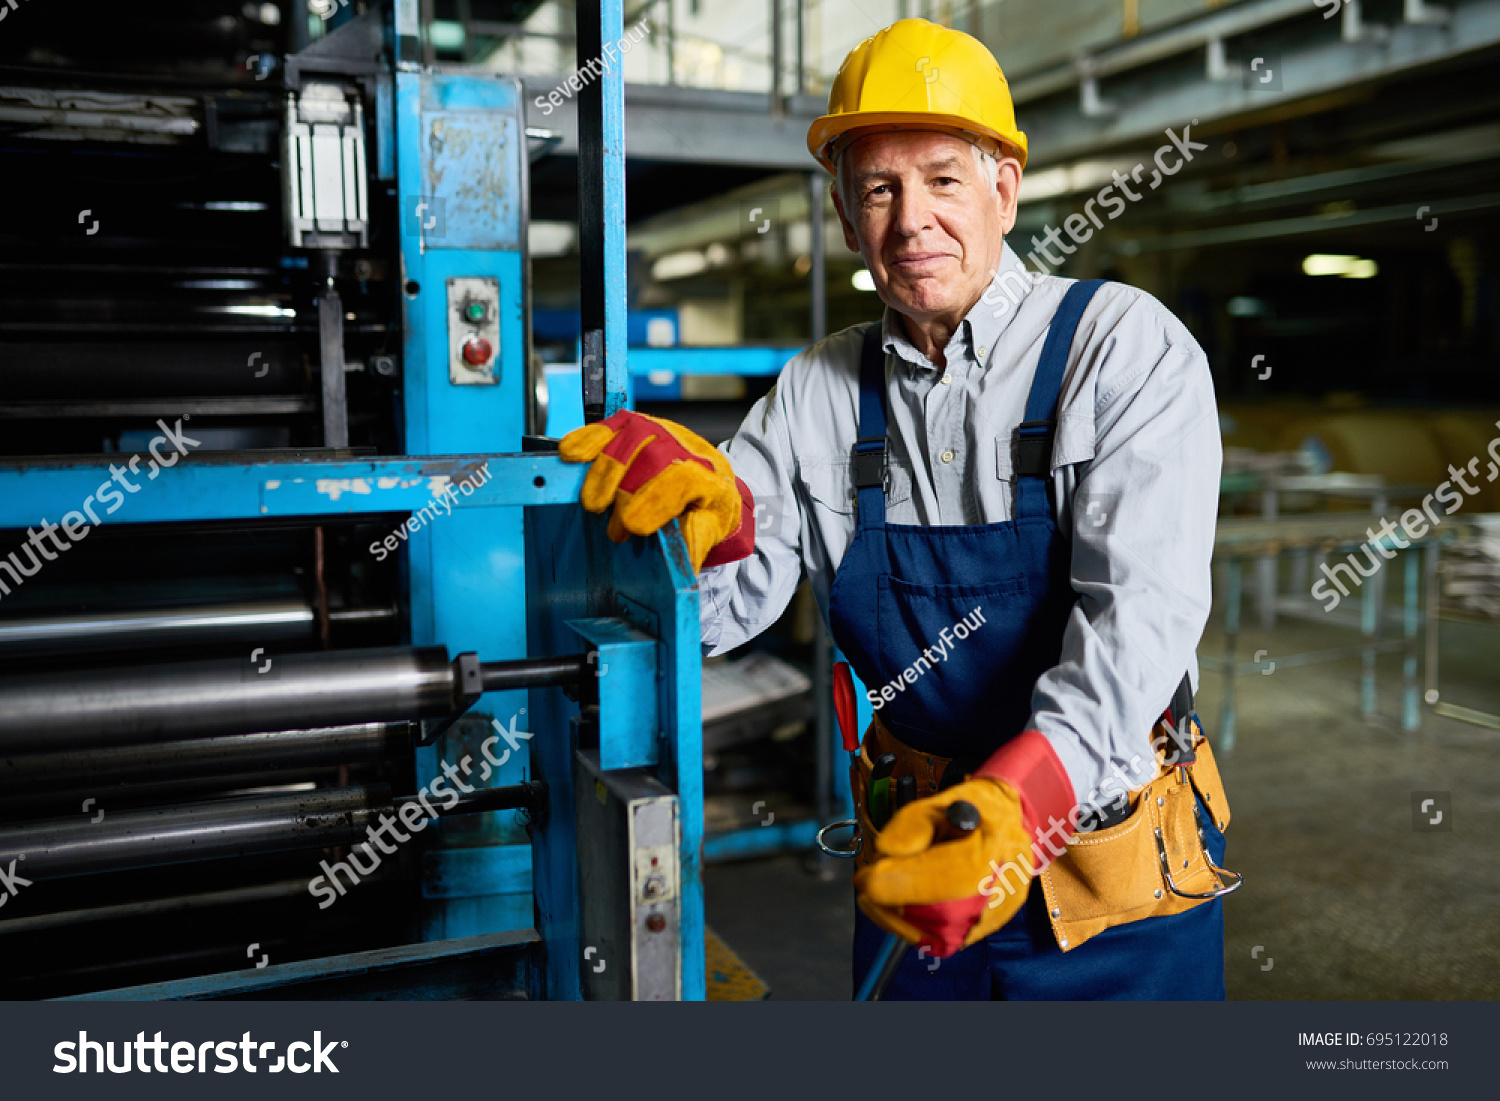 Portrait of senior factory worker smiling looking at camera standing by machine in modern industrial workshop #695122018